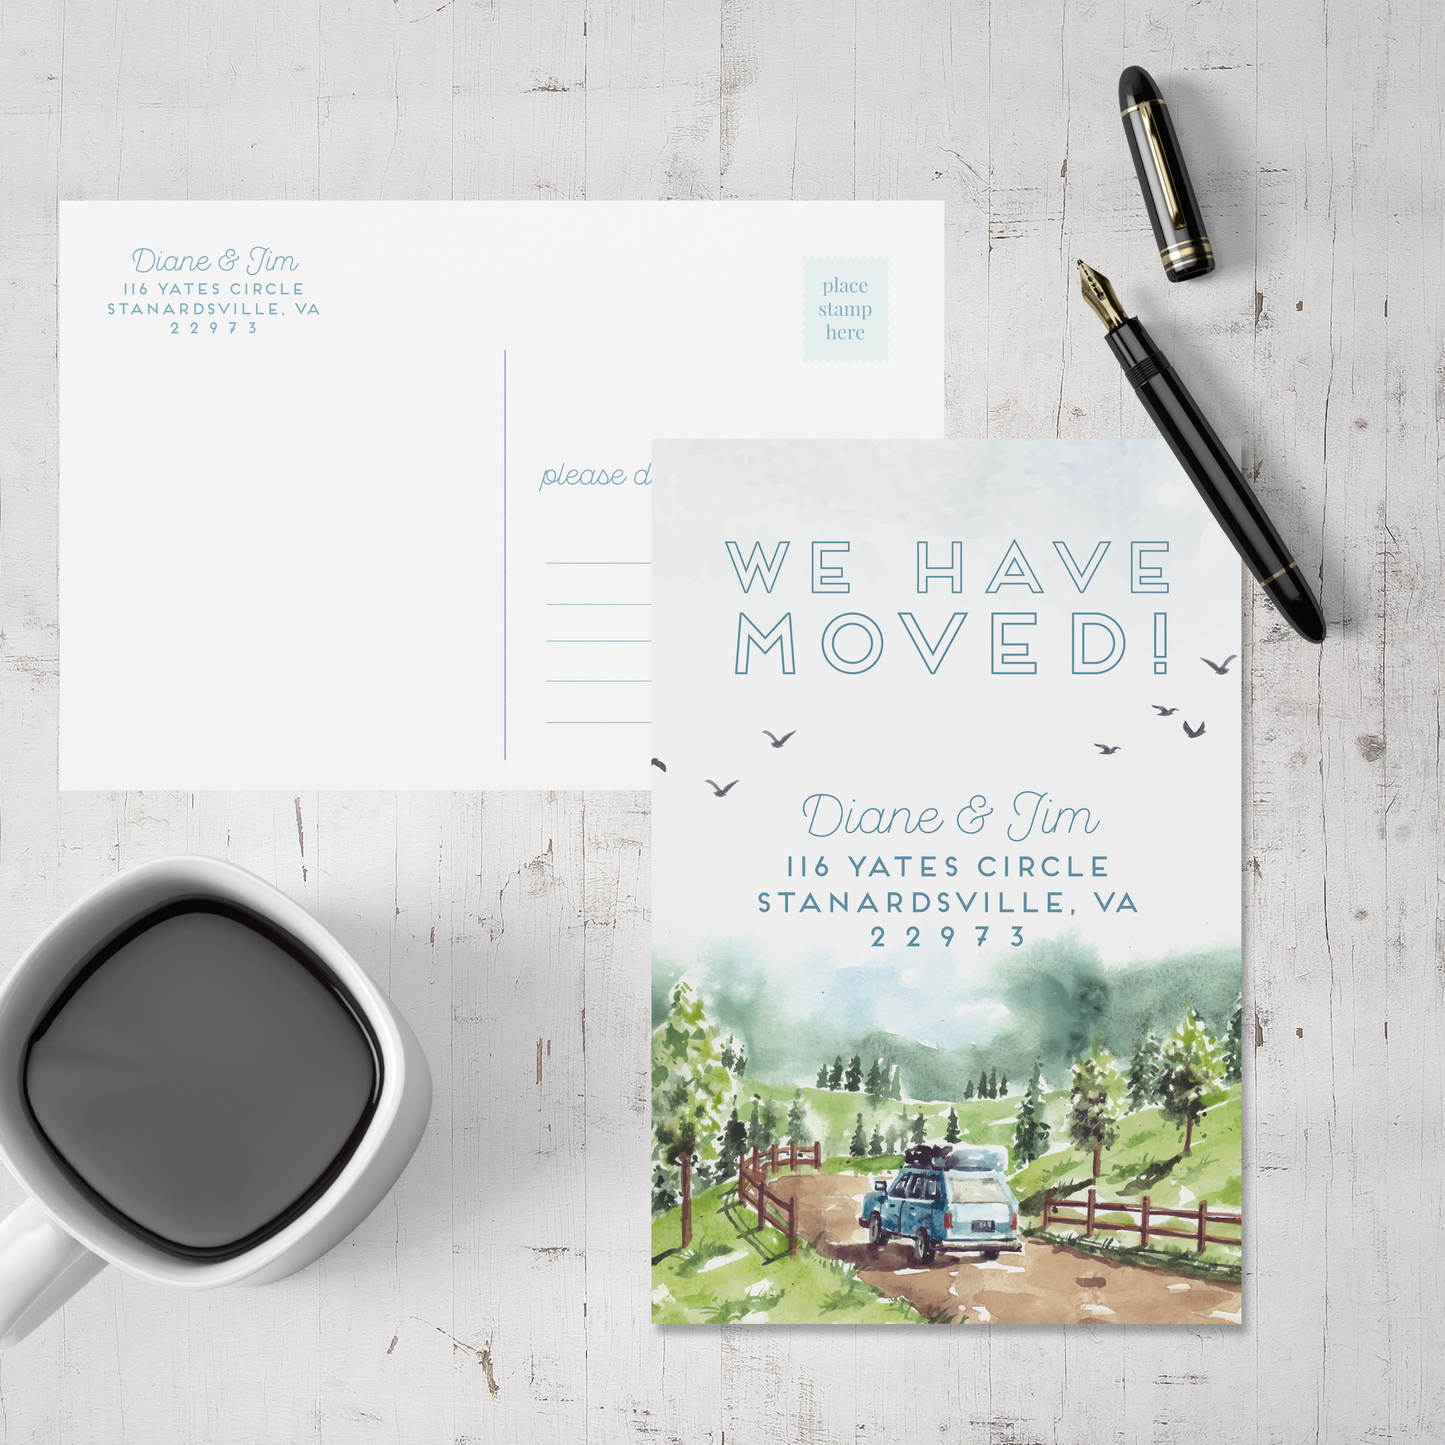 We Have Moved Driving Car Post Card (Set of 50)